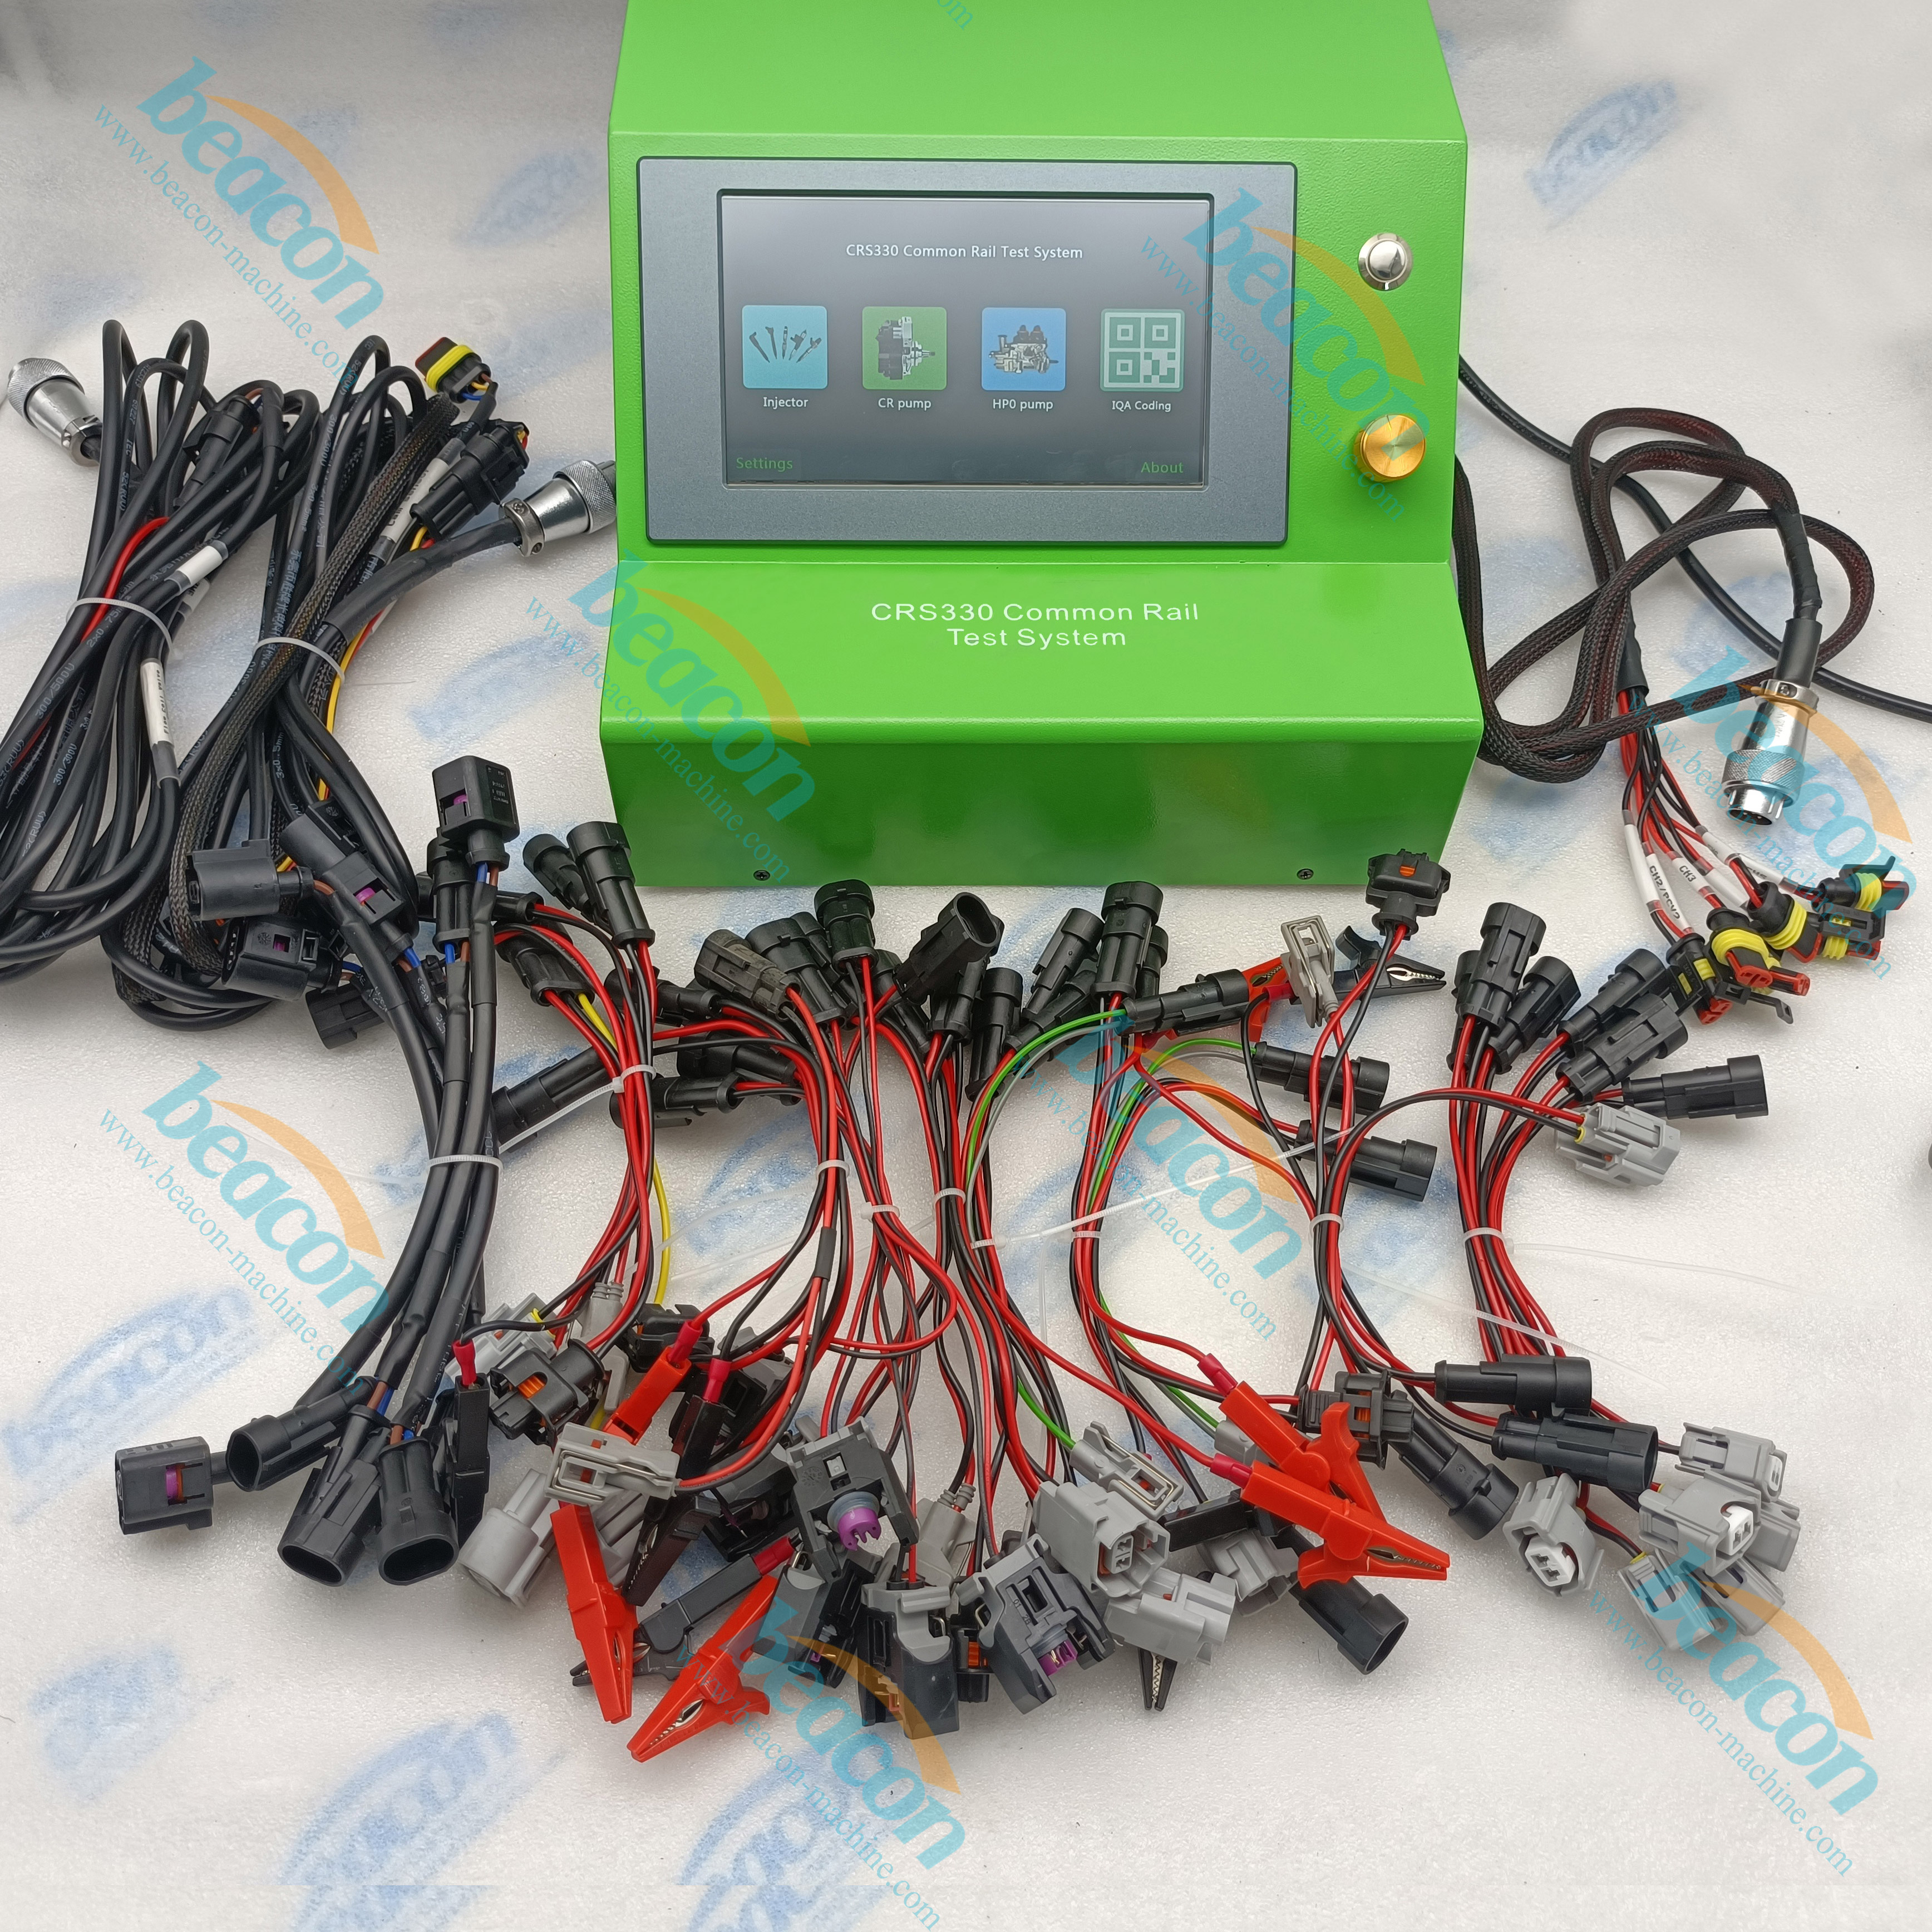 Hot selling CRS330 for testing solenoid injector and piezo injector common rail injector tester simulator